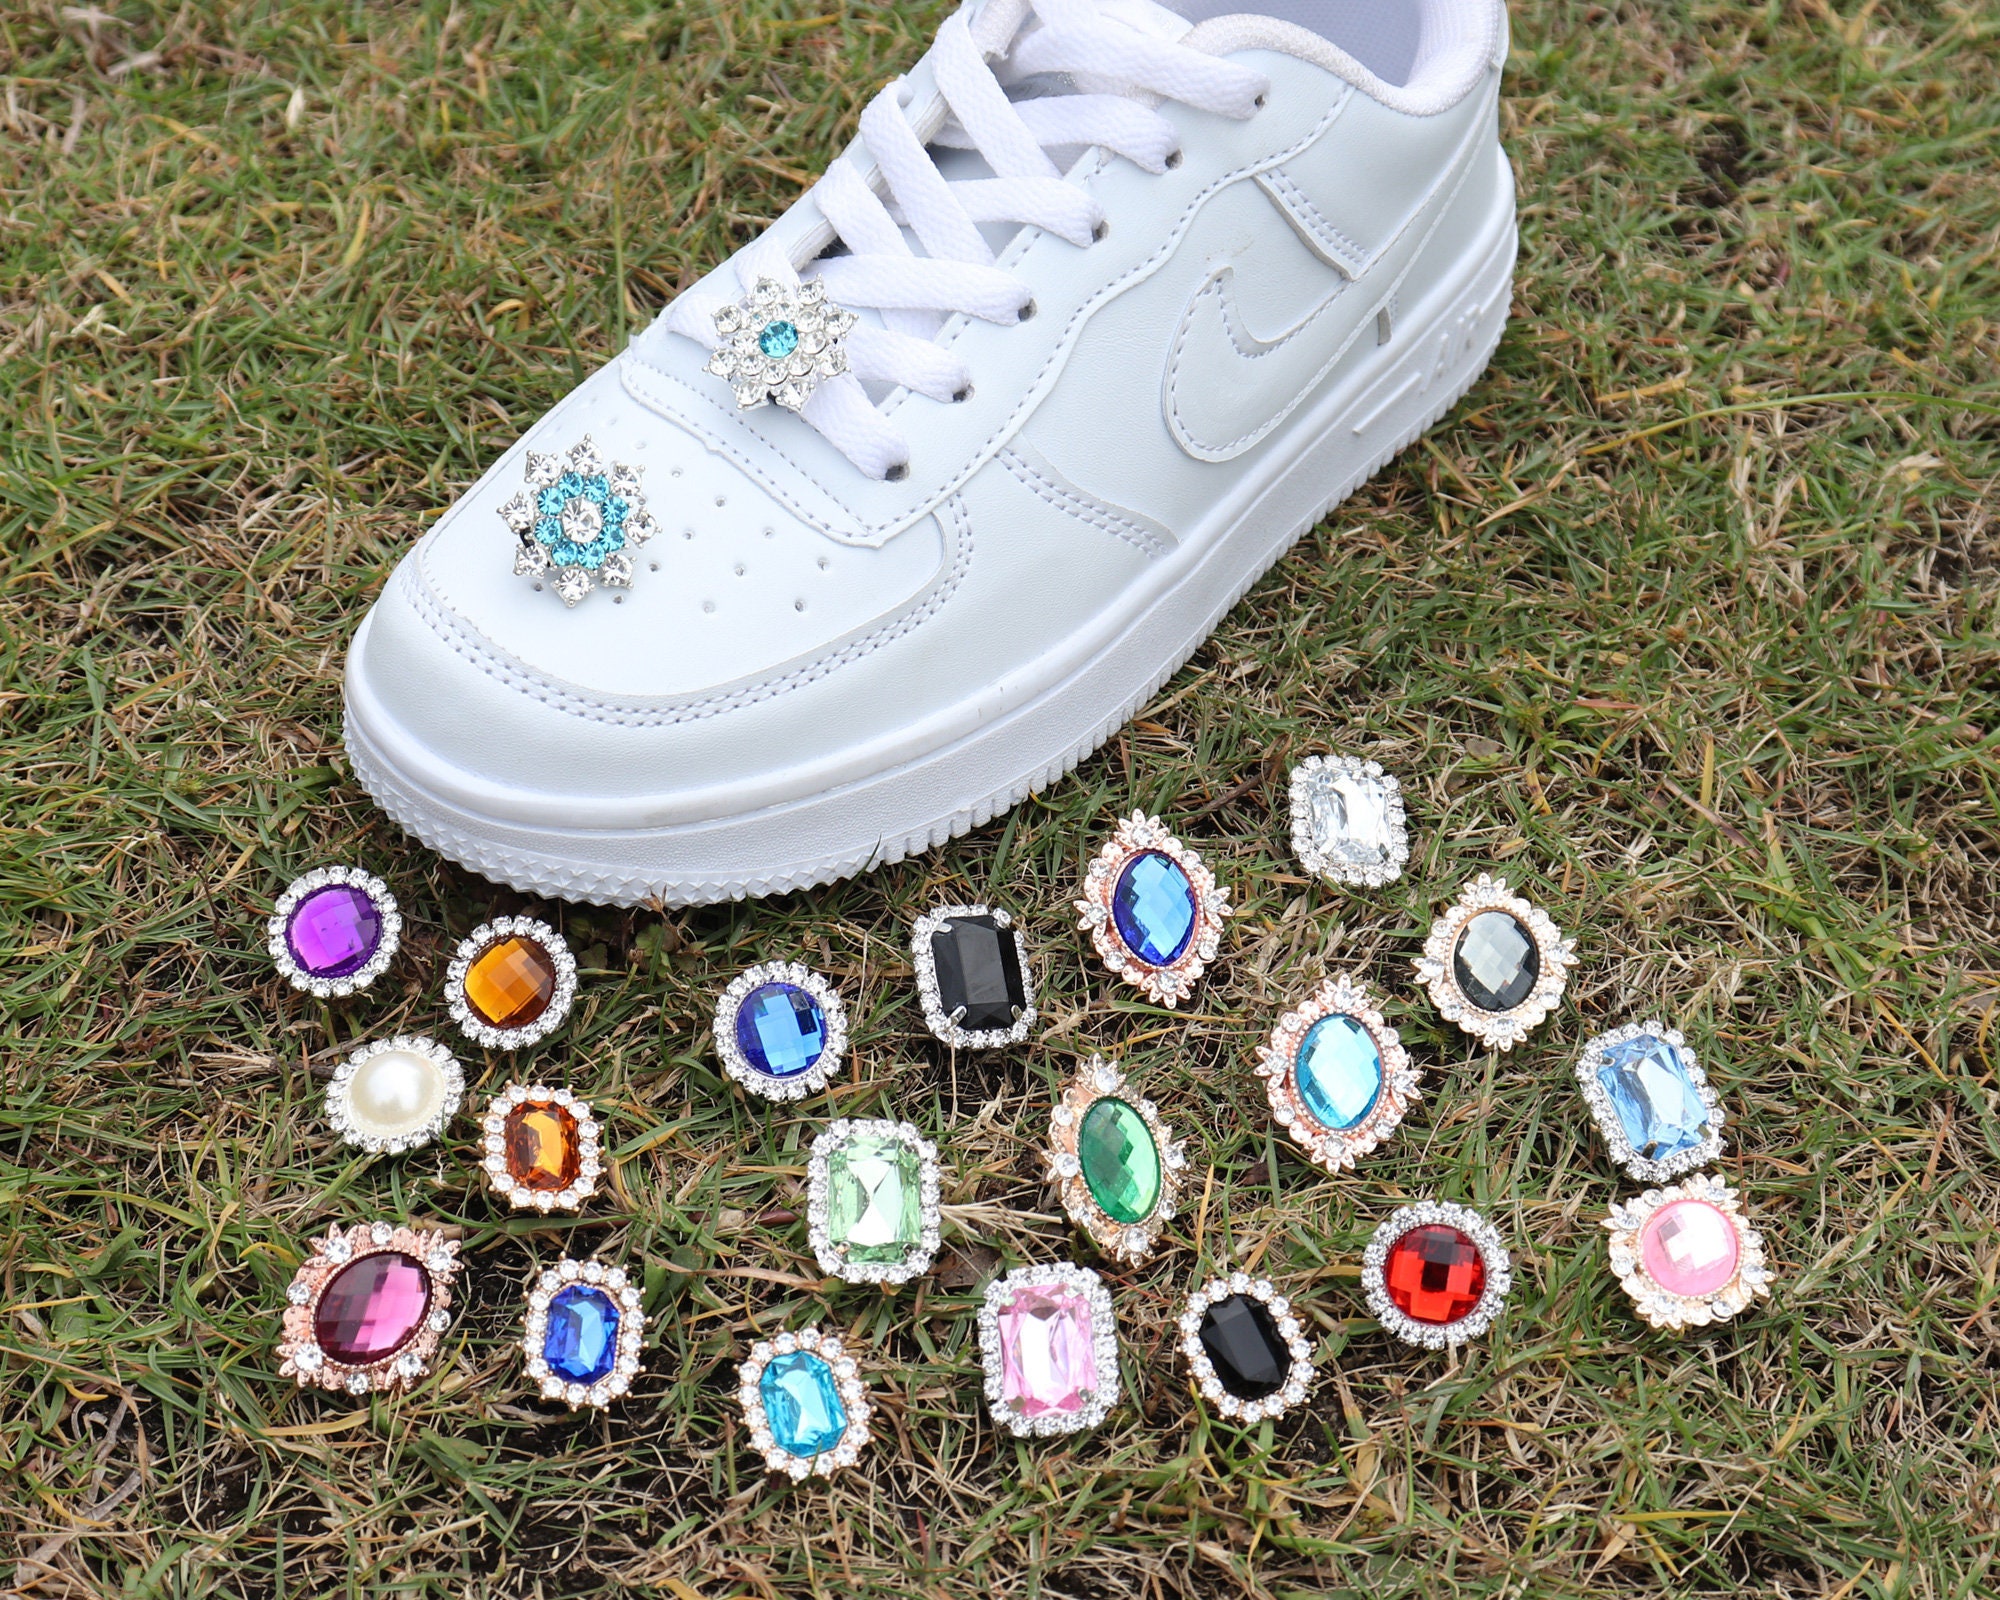 Diamond Shoelaces Sneakers Clips Decoration Shoe Charms Decorative Shoe  Clips Gem Accessory Gift for Rhinestone Shoelace